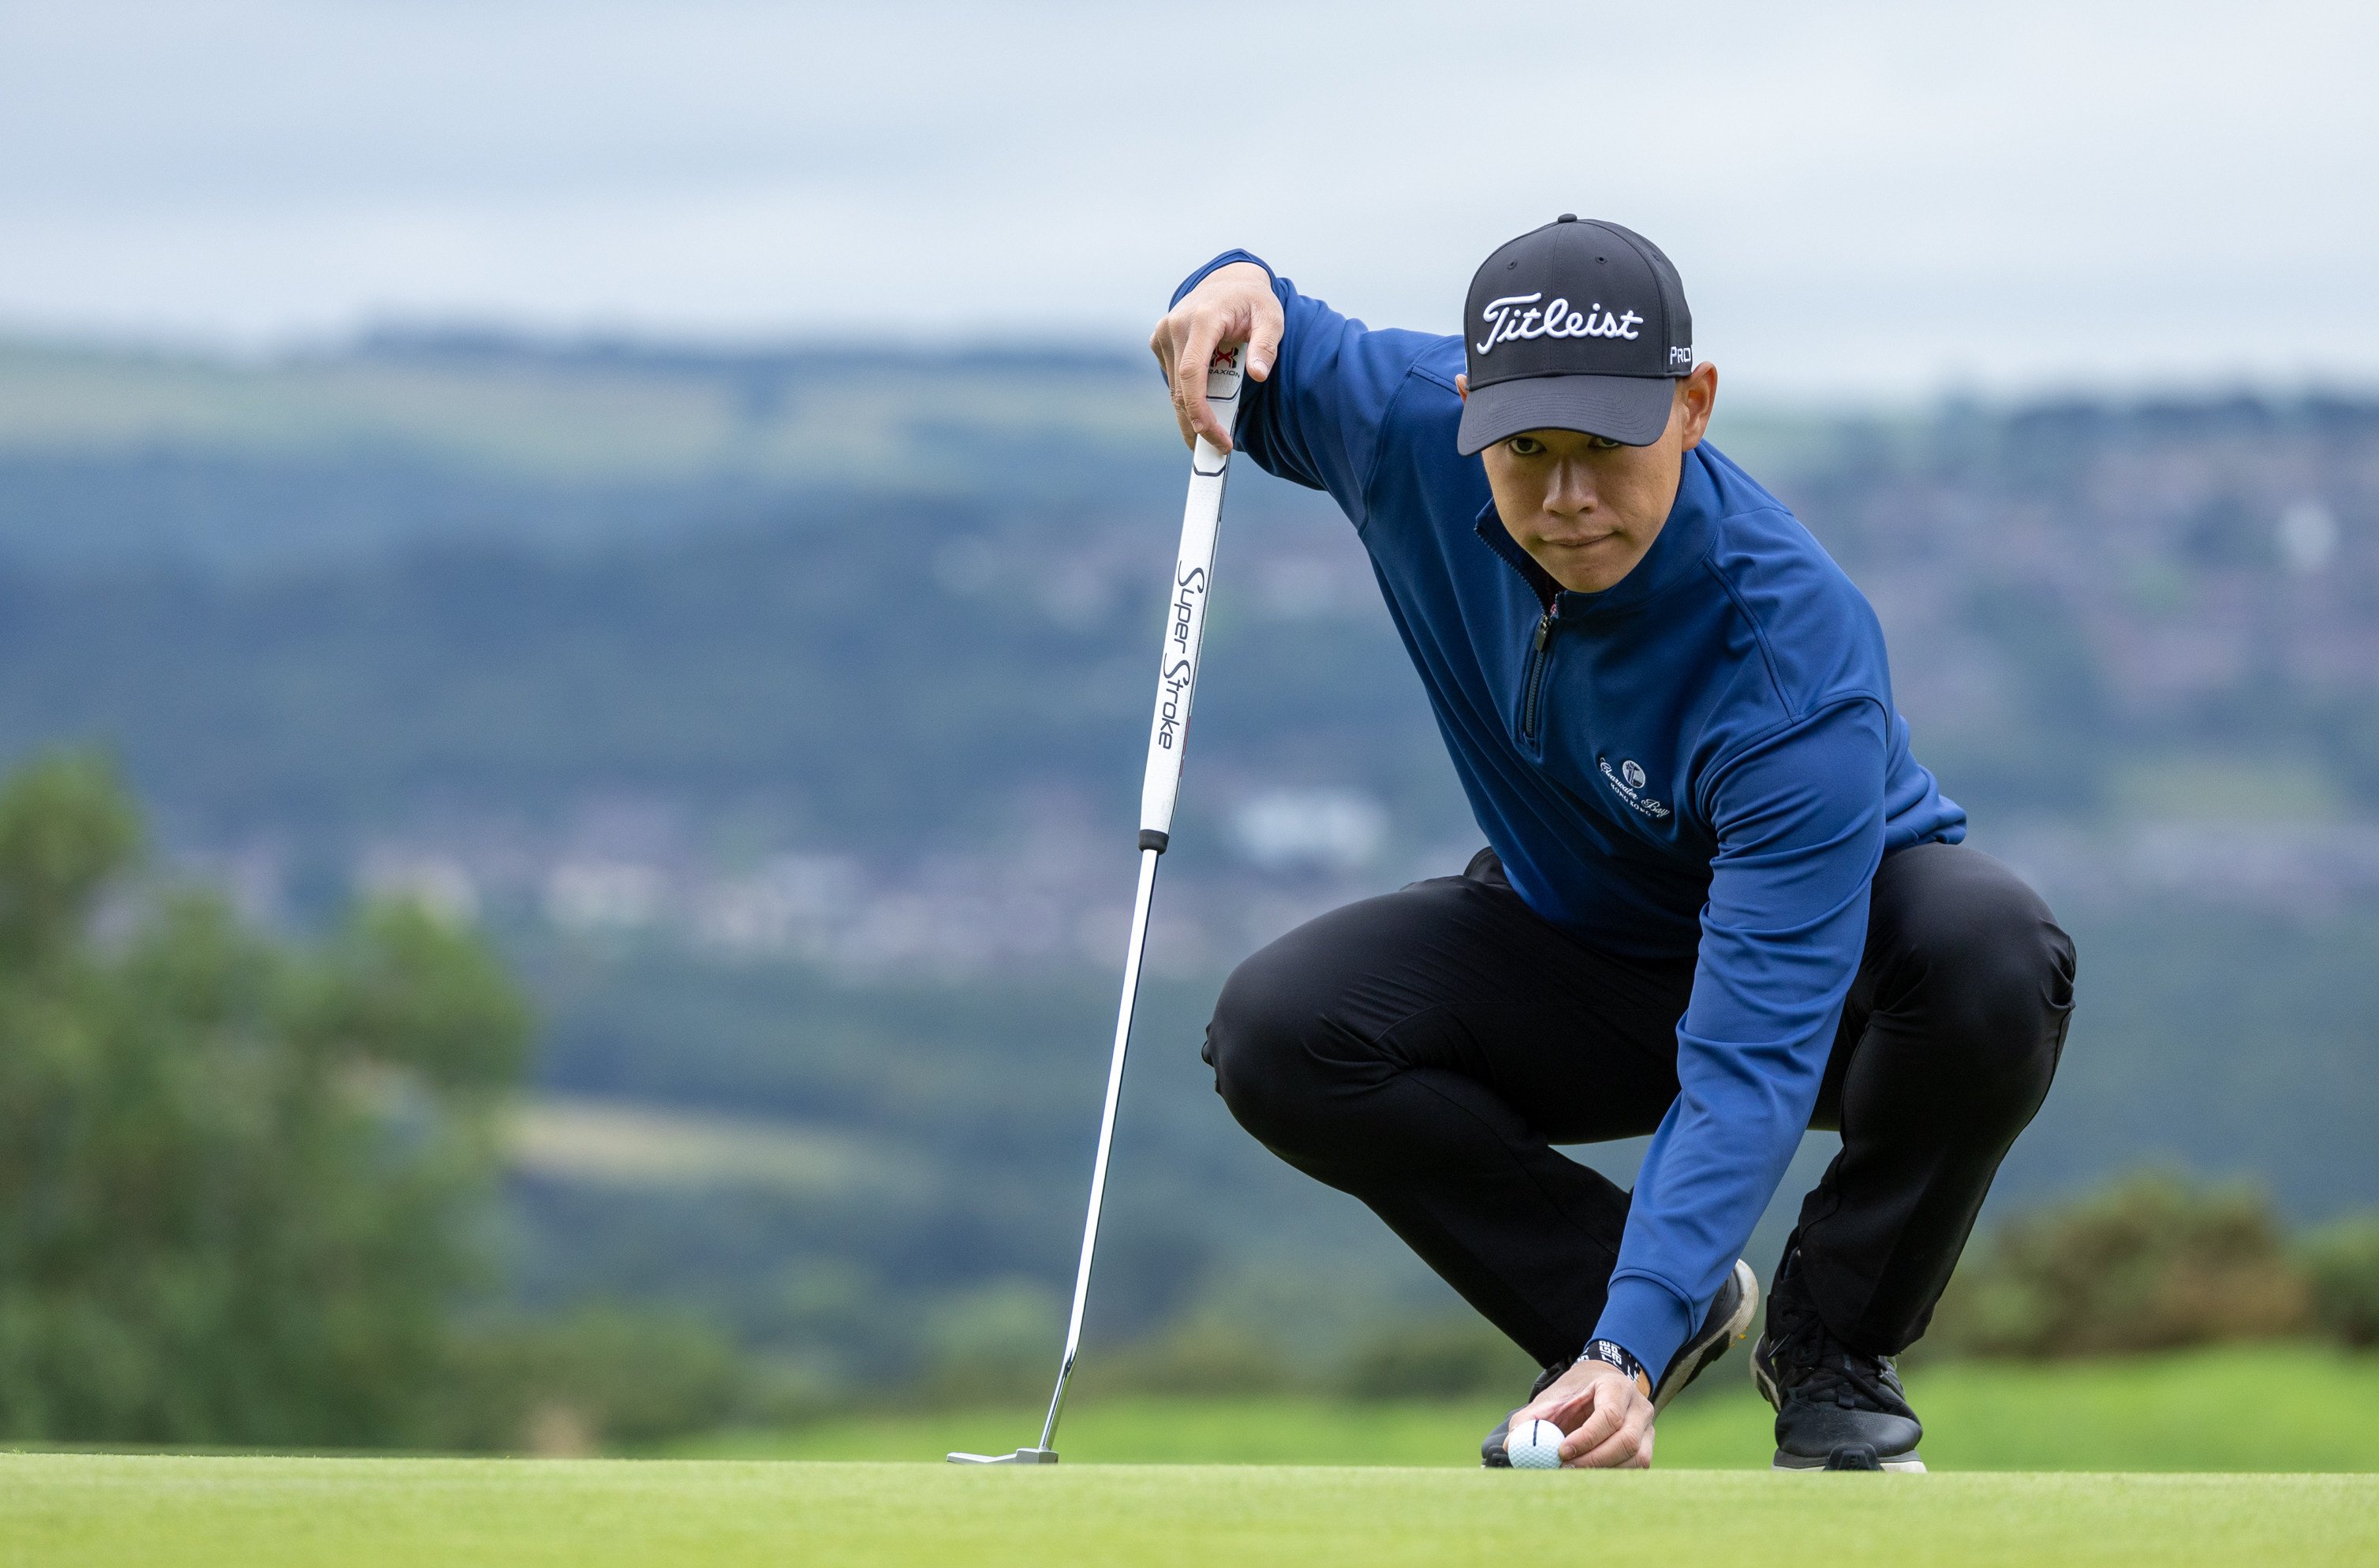 Matthew Cheung lines up a putt during the second round of the International Series England at Close House. Photo: Asian Tour